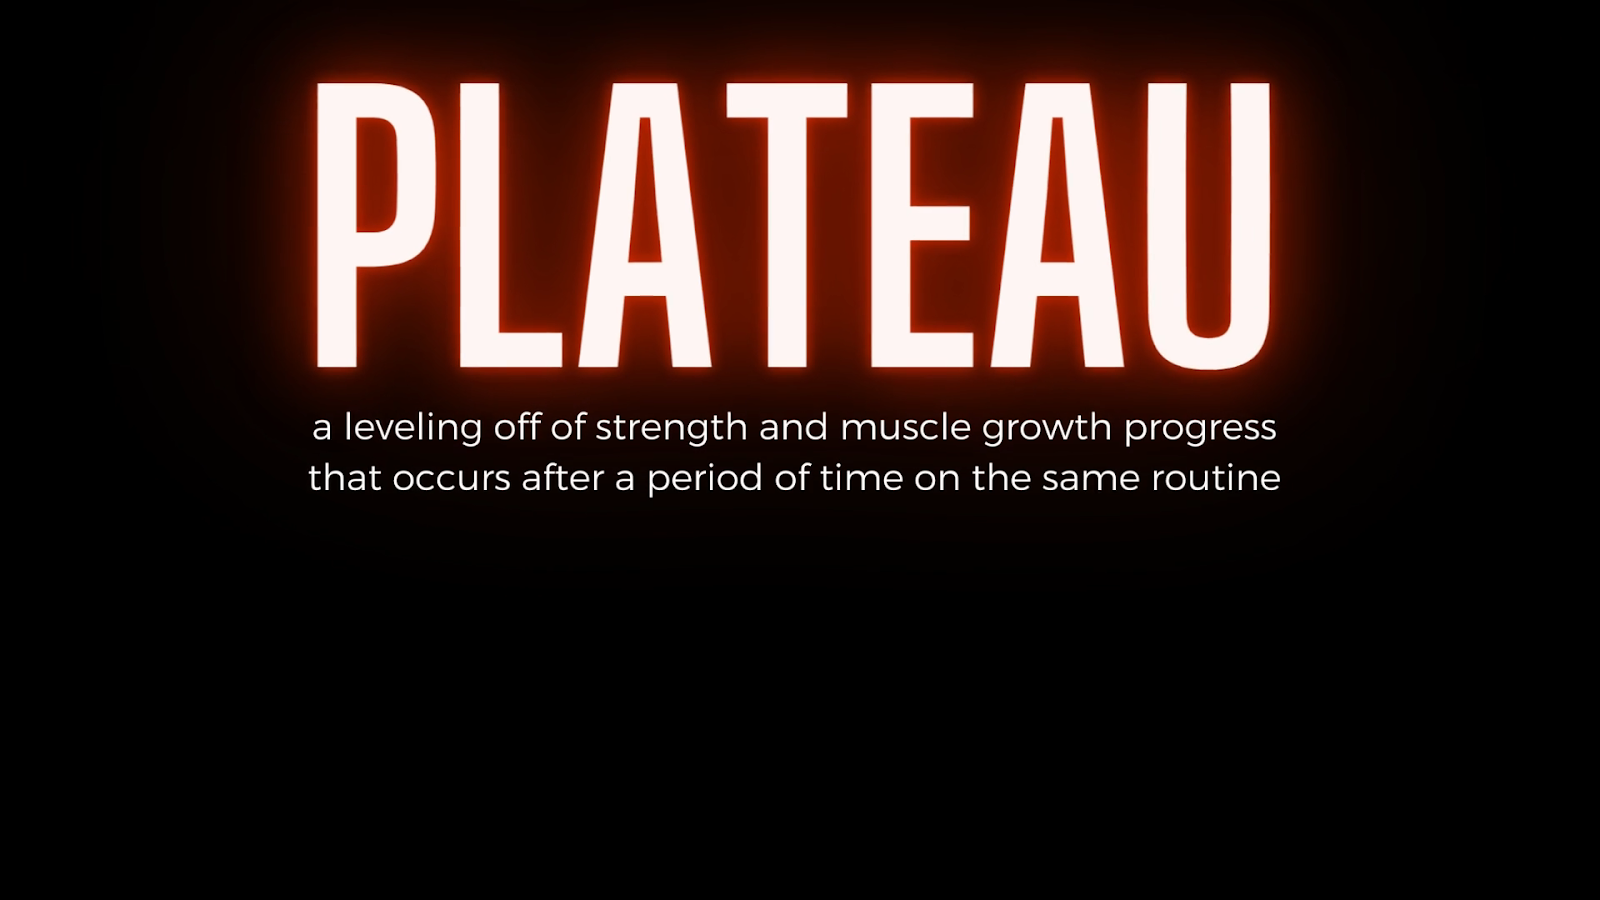 Avoid progress plateaus by varying your training routine